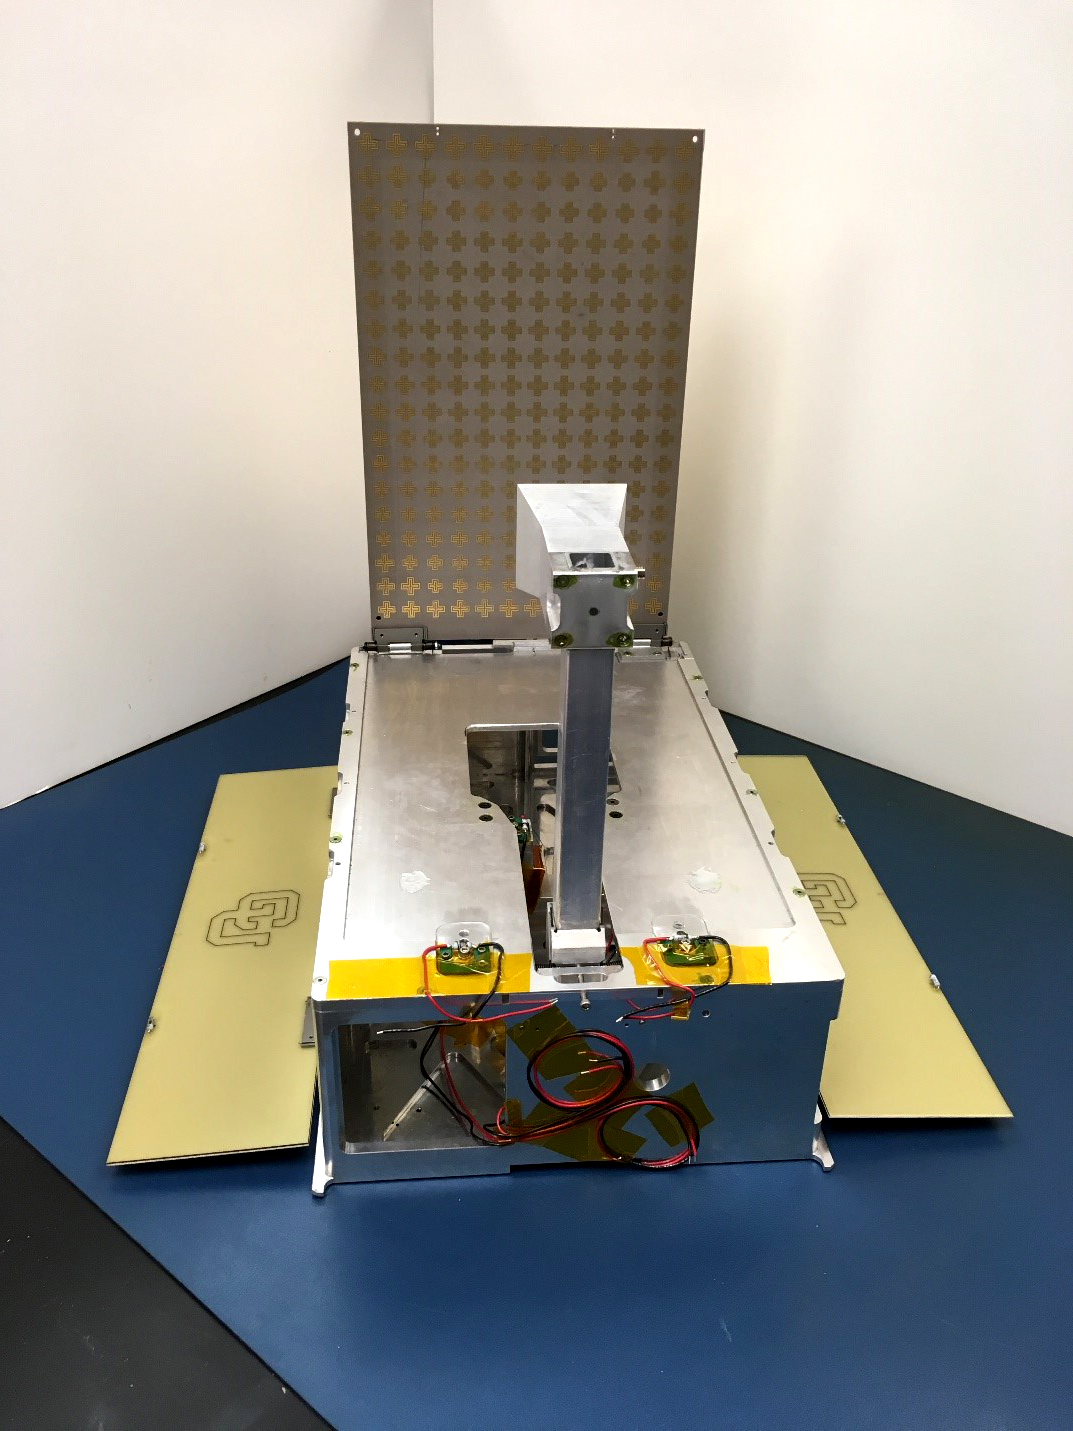 The CU-E3 CubeSat prototype in the deployed position.